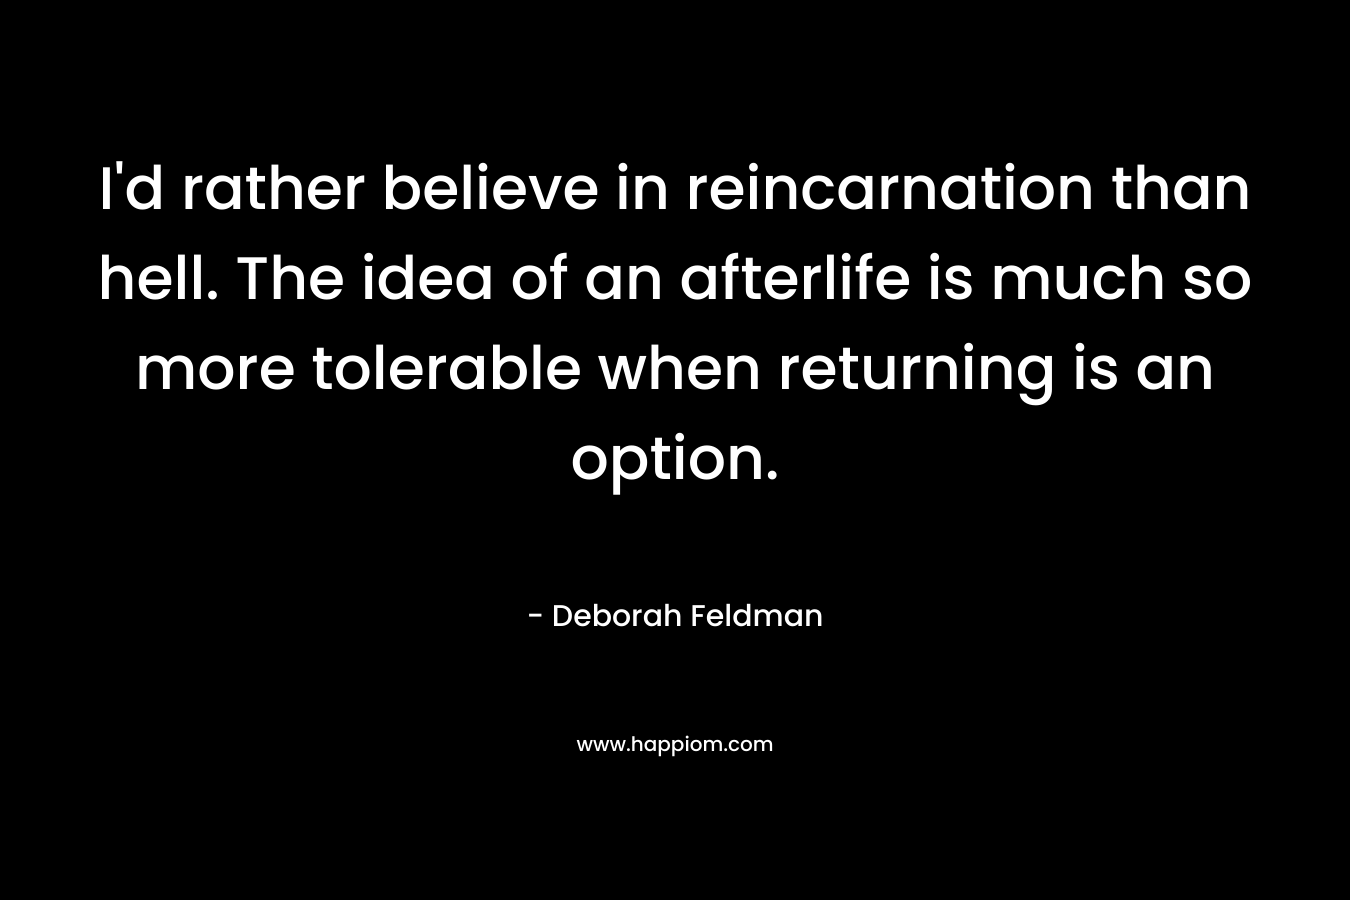 I’d rather believe in reincarnation than hell. The idea of an afterlife is much so more tolerable when returning is an option. – Deborah Feldman